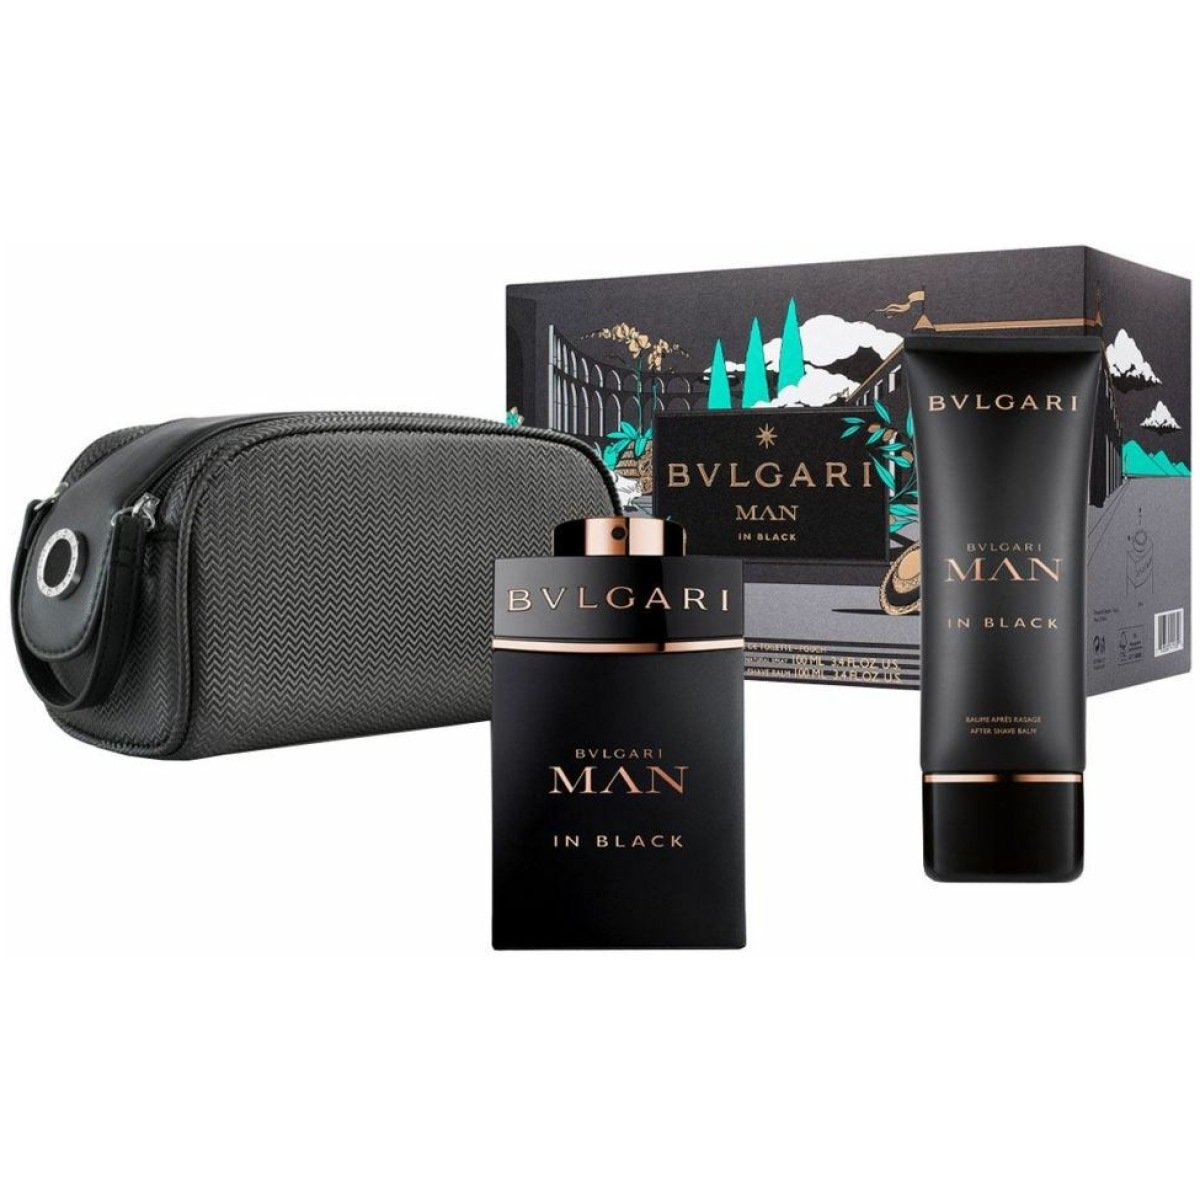 Bvlgari Man In Black Gift Set For Men (EDP 100ml + A/F Shave Balm 75ml + 1 Travel Pouch)